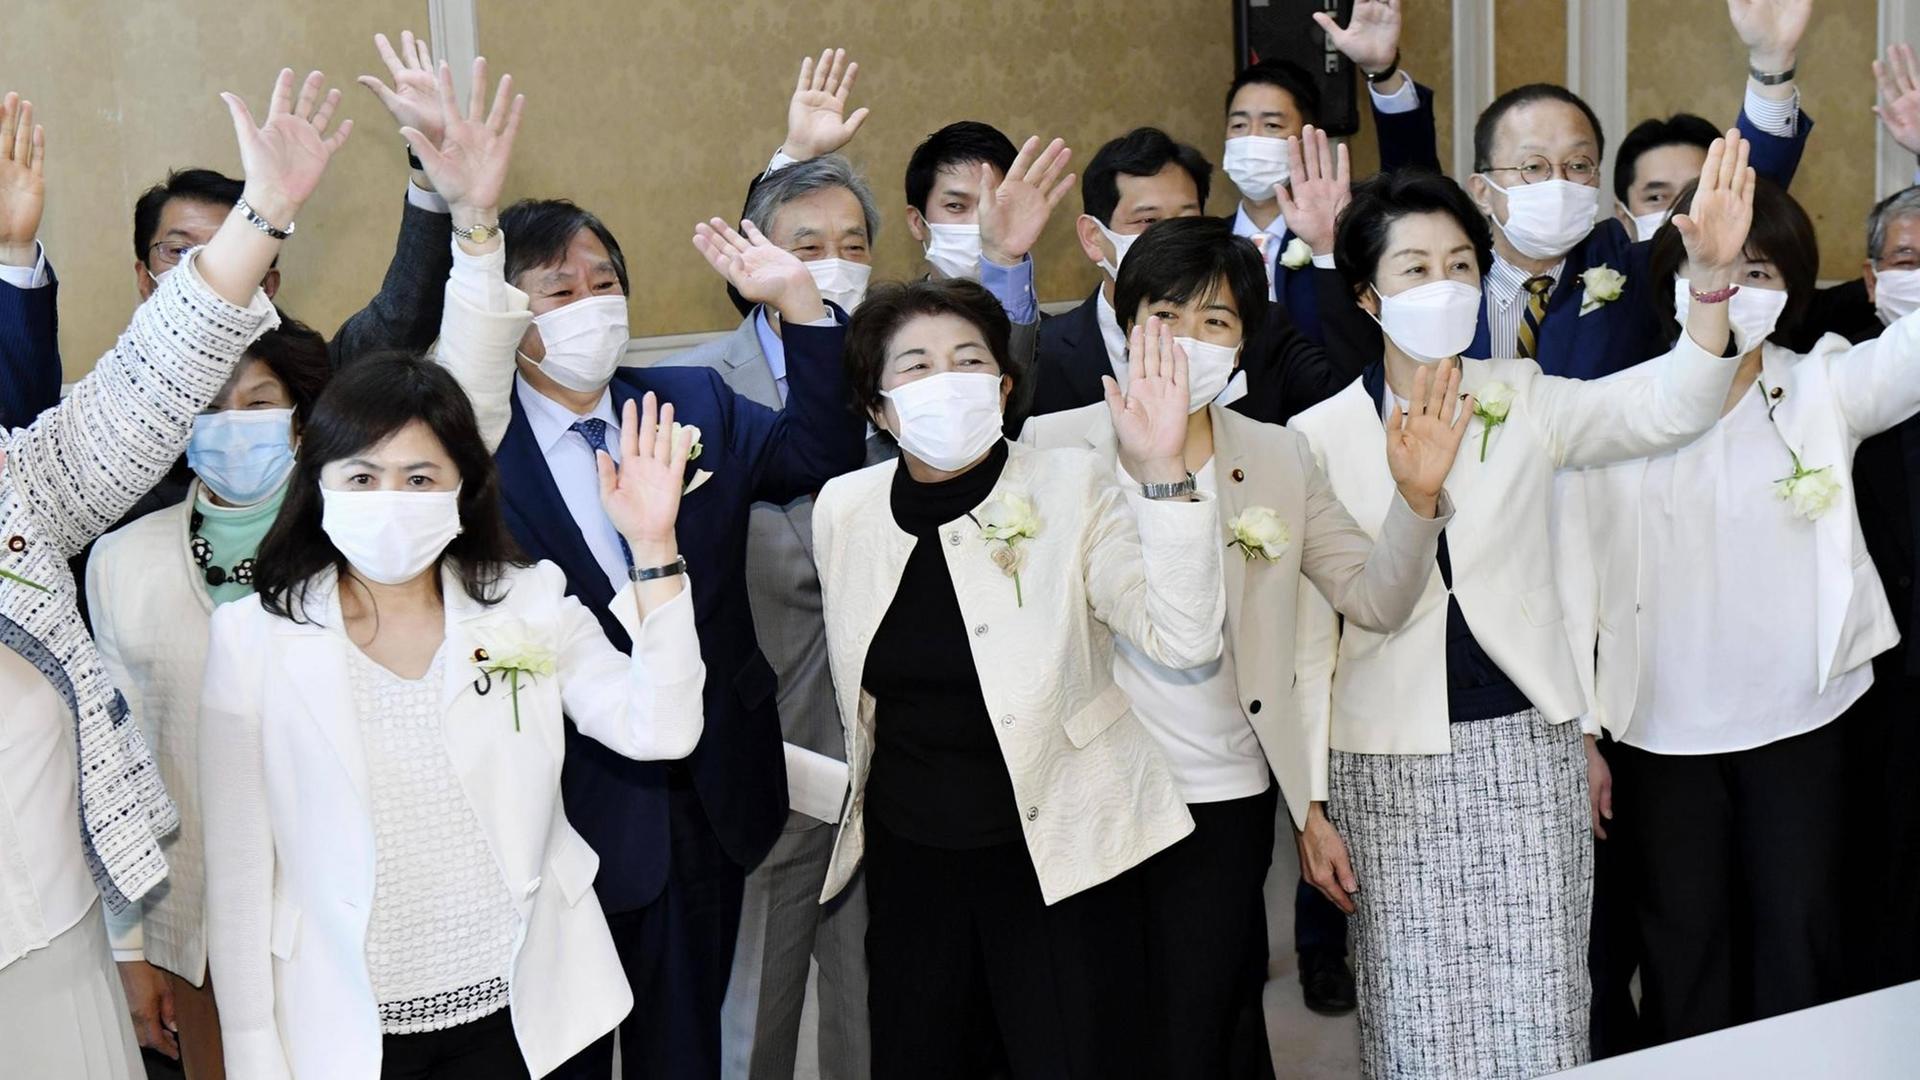 News Bilder des Tages Protest against sexist remarks by Olympic organizing boss Female opposition lawmakers wear white jackets with white roses in Tokyo on Feb. 9, 2021, as a protest against sexist remarks by Yoshiro Mori, head of the Tokyo Olympic organizing committee. PUBLICATIONxINxGERxSUIxAUTxHUNxONLY